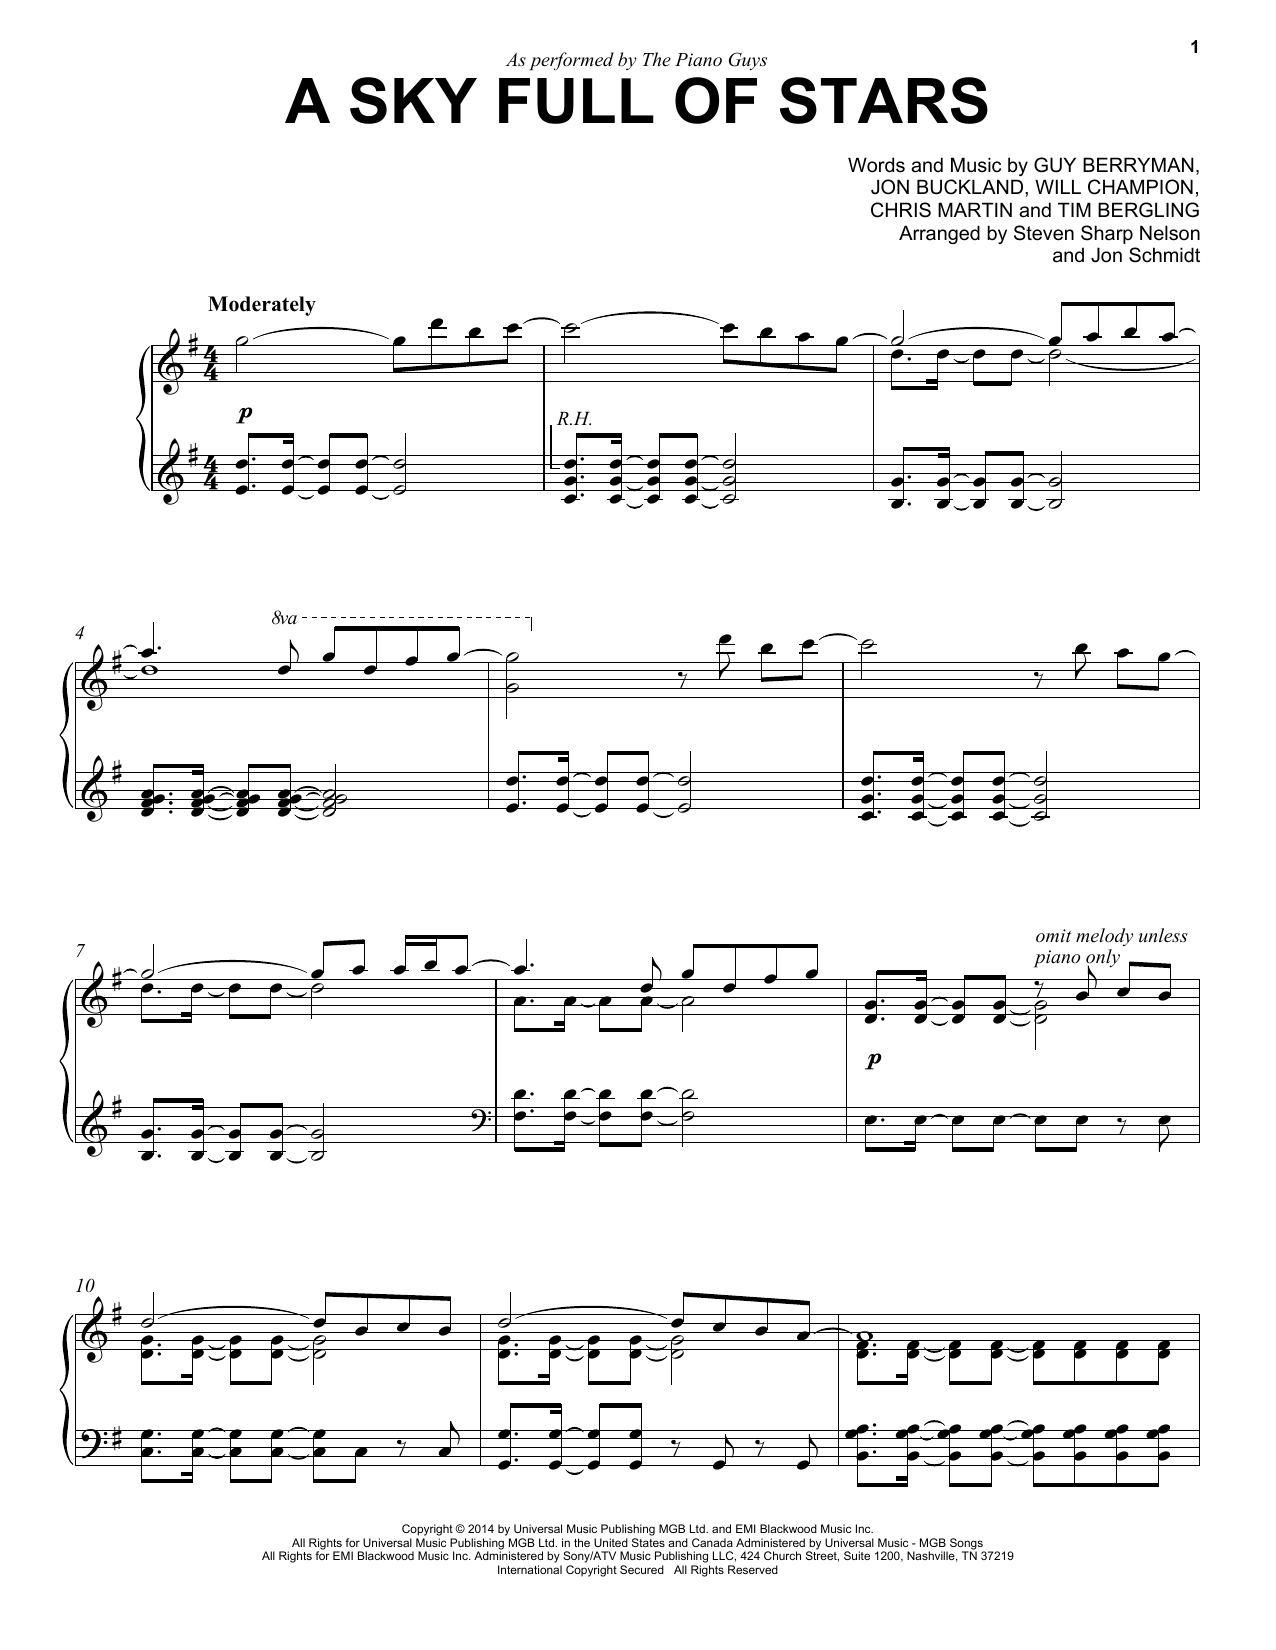 The Piano Guys A Sky Full Of Stars sheet music notes printable PDF score